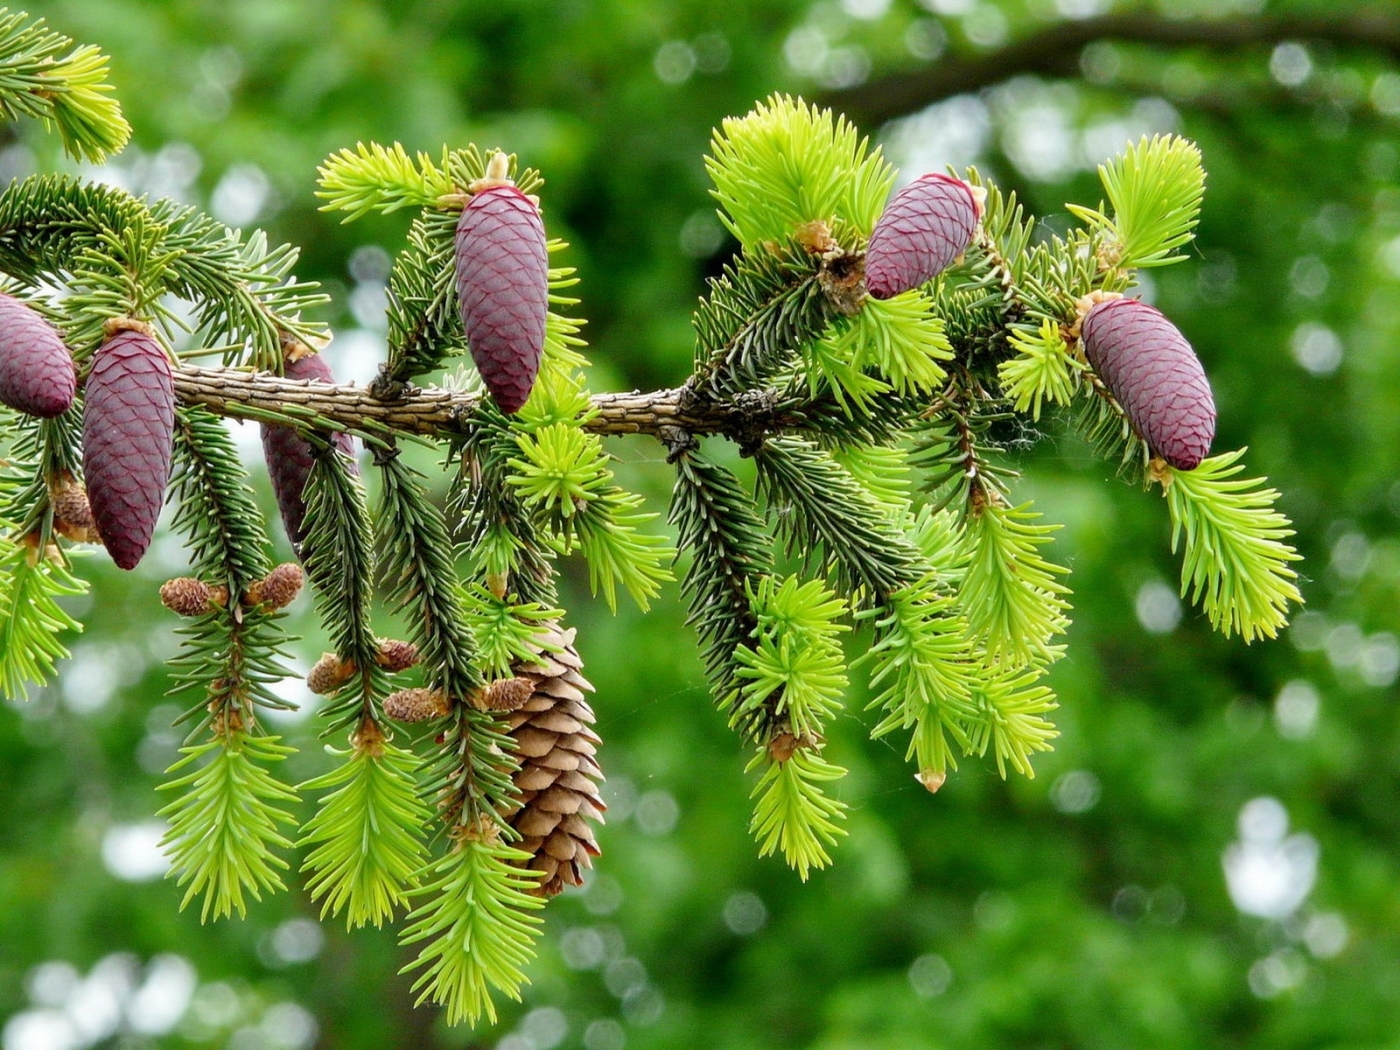 41889 download wallpaper nature, green, landscape, cones, fir-trees screensavers and pictures for free